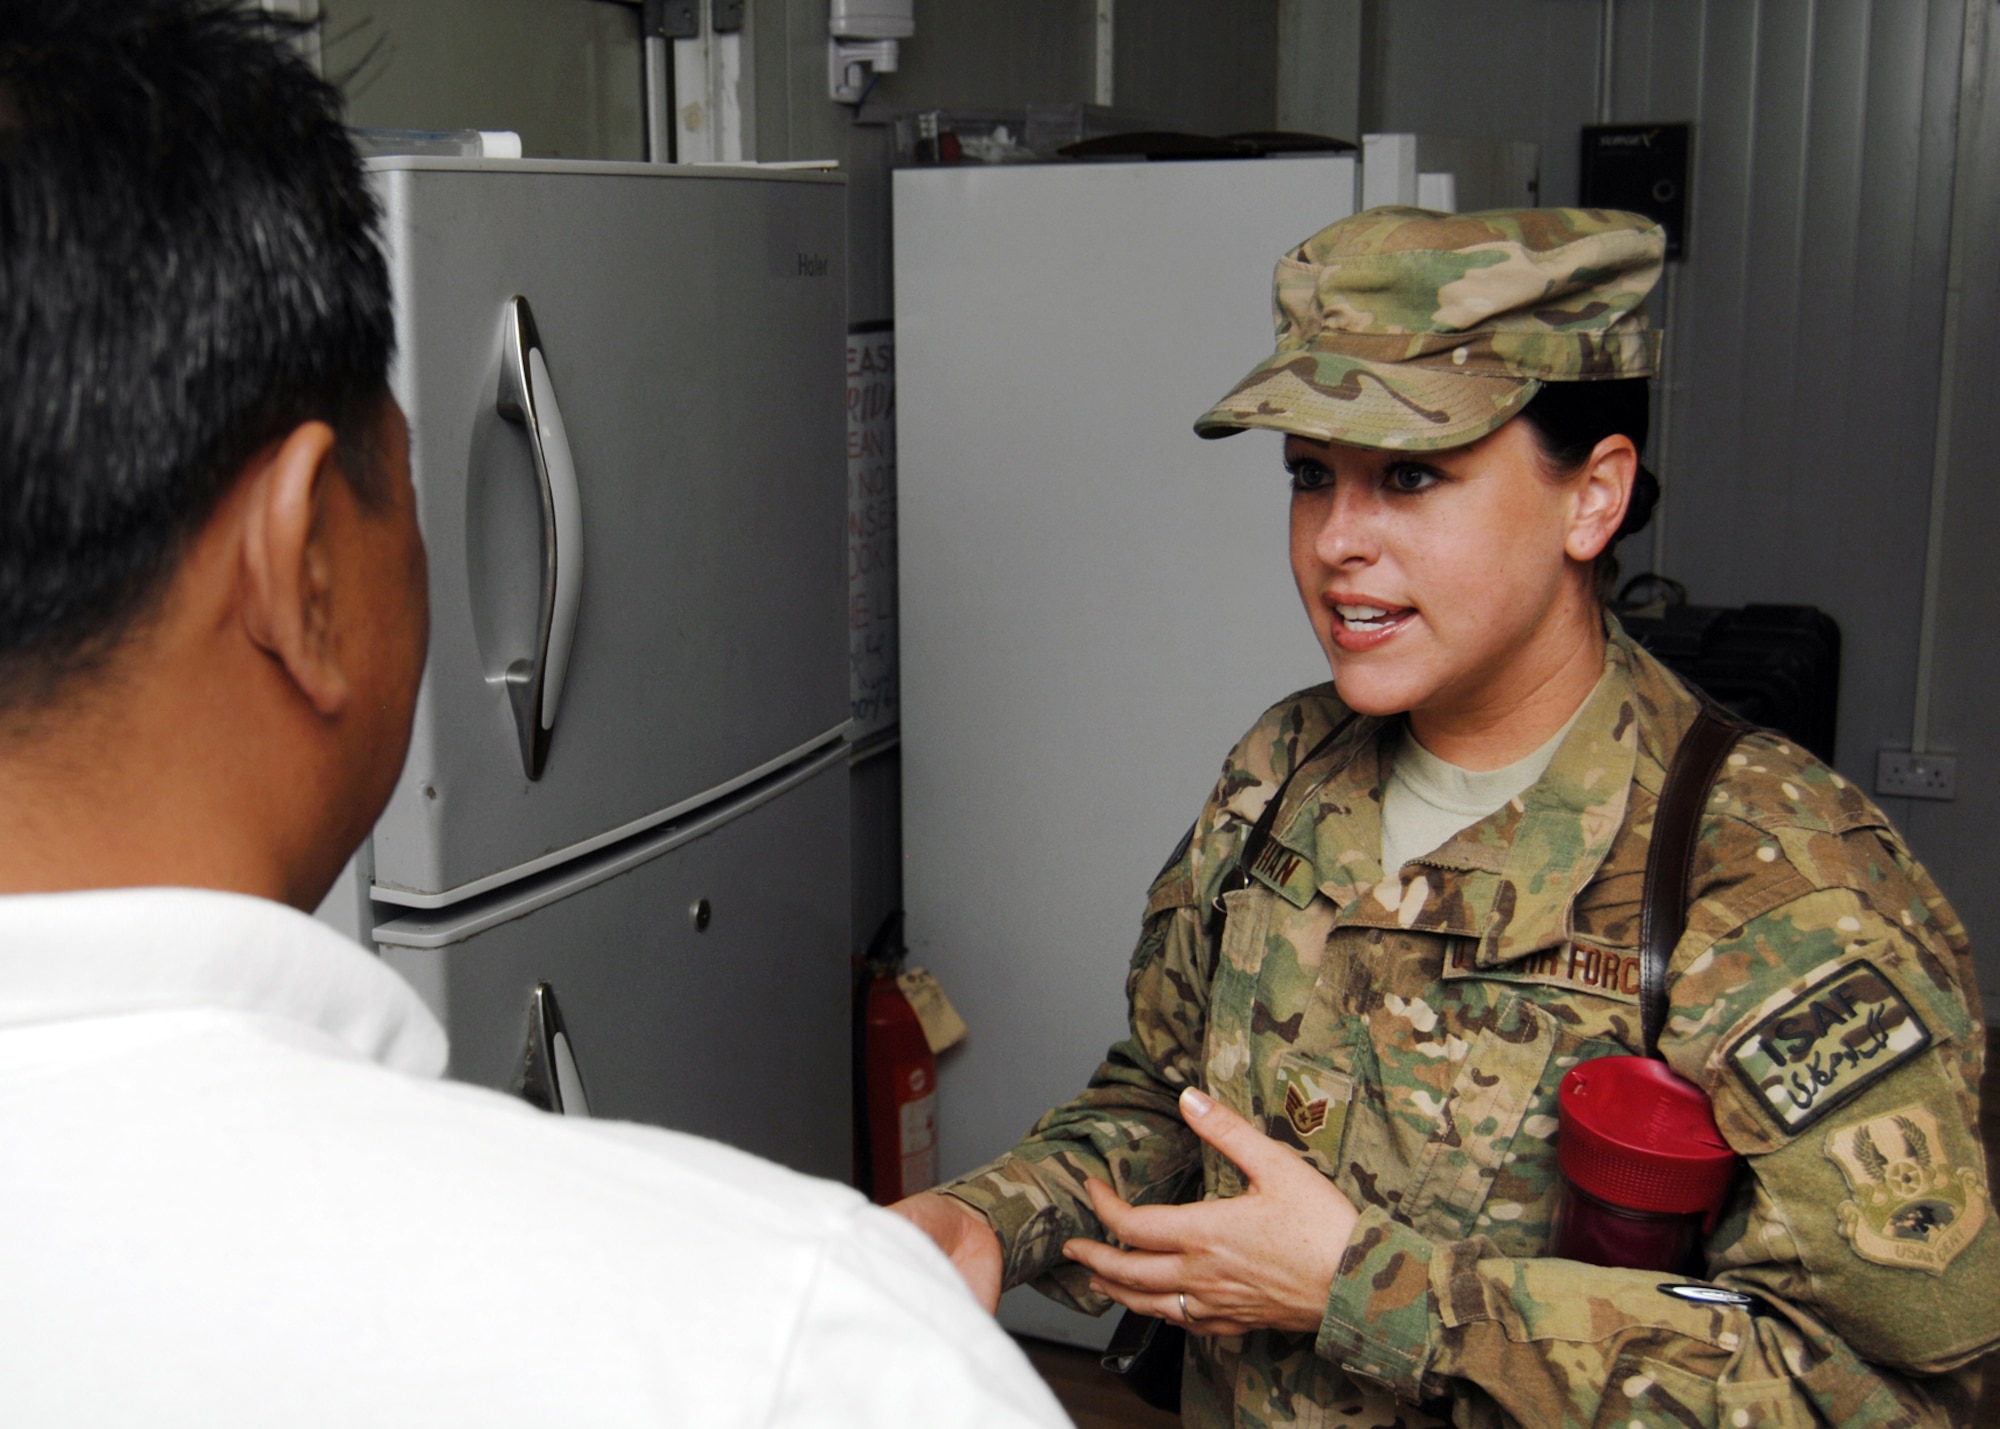 U.S. Air Force Staff Sgt. Jennifer Vaughan, 451st Air Expeditionary Wing public health technician speaks with the manager of a camp that was inspected recently. She offers directions and advice to the managers to bring their kitchen and dining facilities up to standards. (U.S. Air Force photo/Master Sgt. Russell Martin)